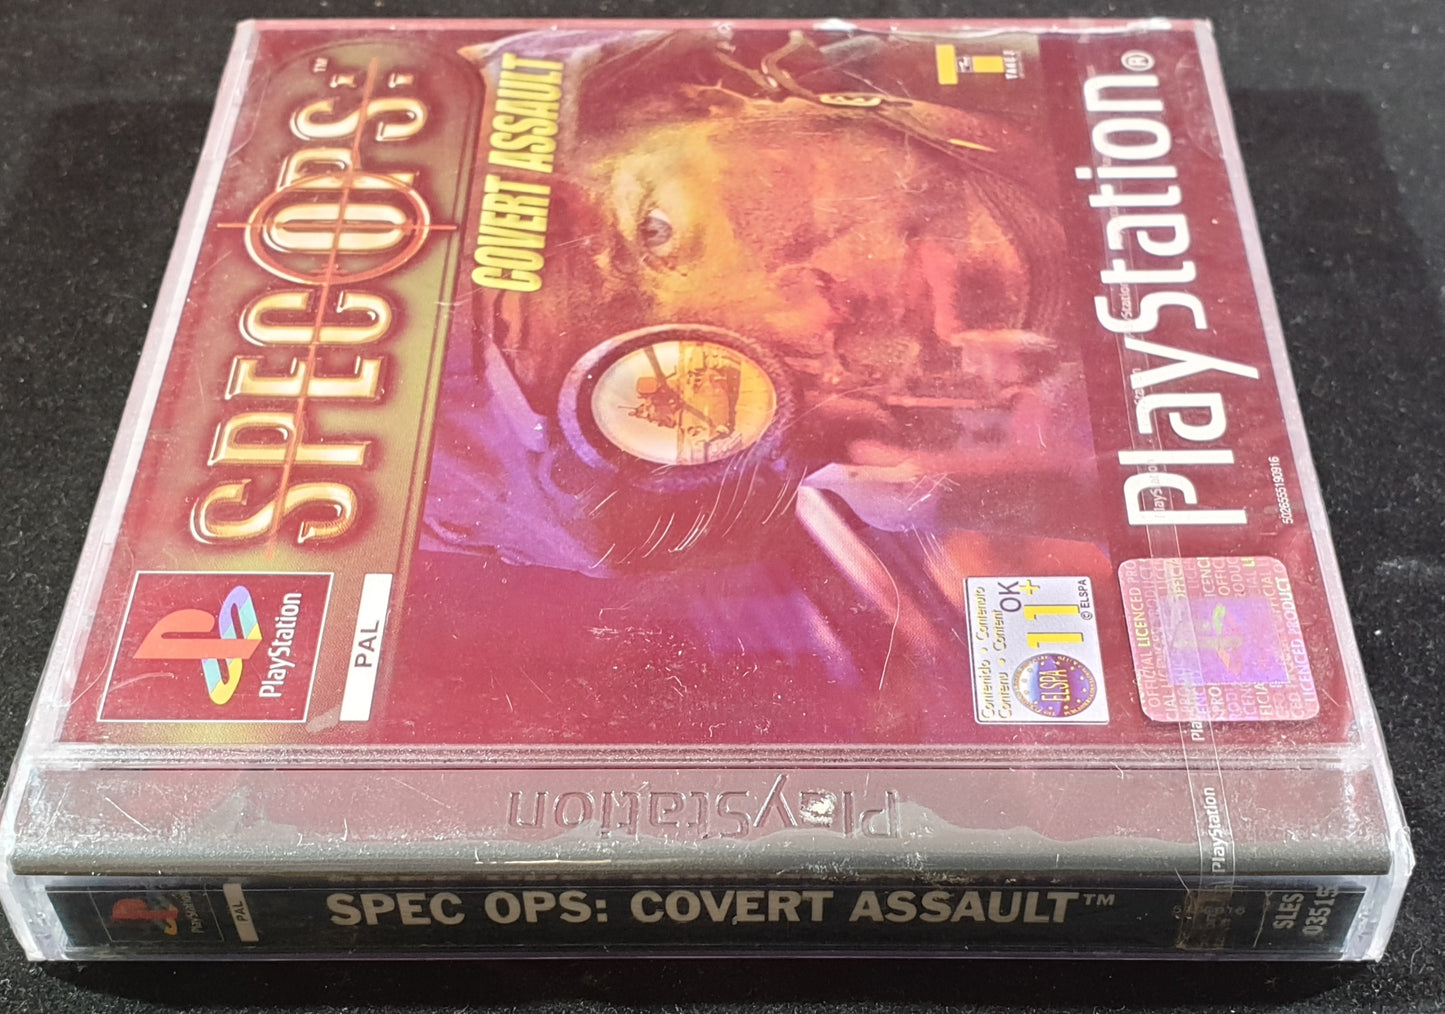 Brand New and Sealed Spec Ops Covert Assault Sony Playstation 1 (PS1) Game